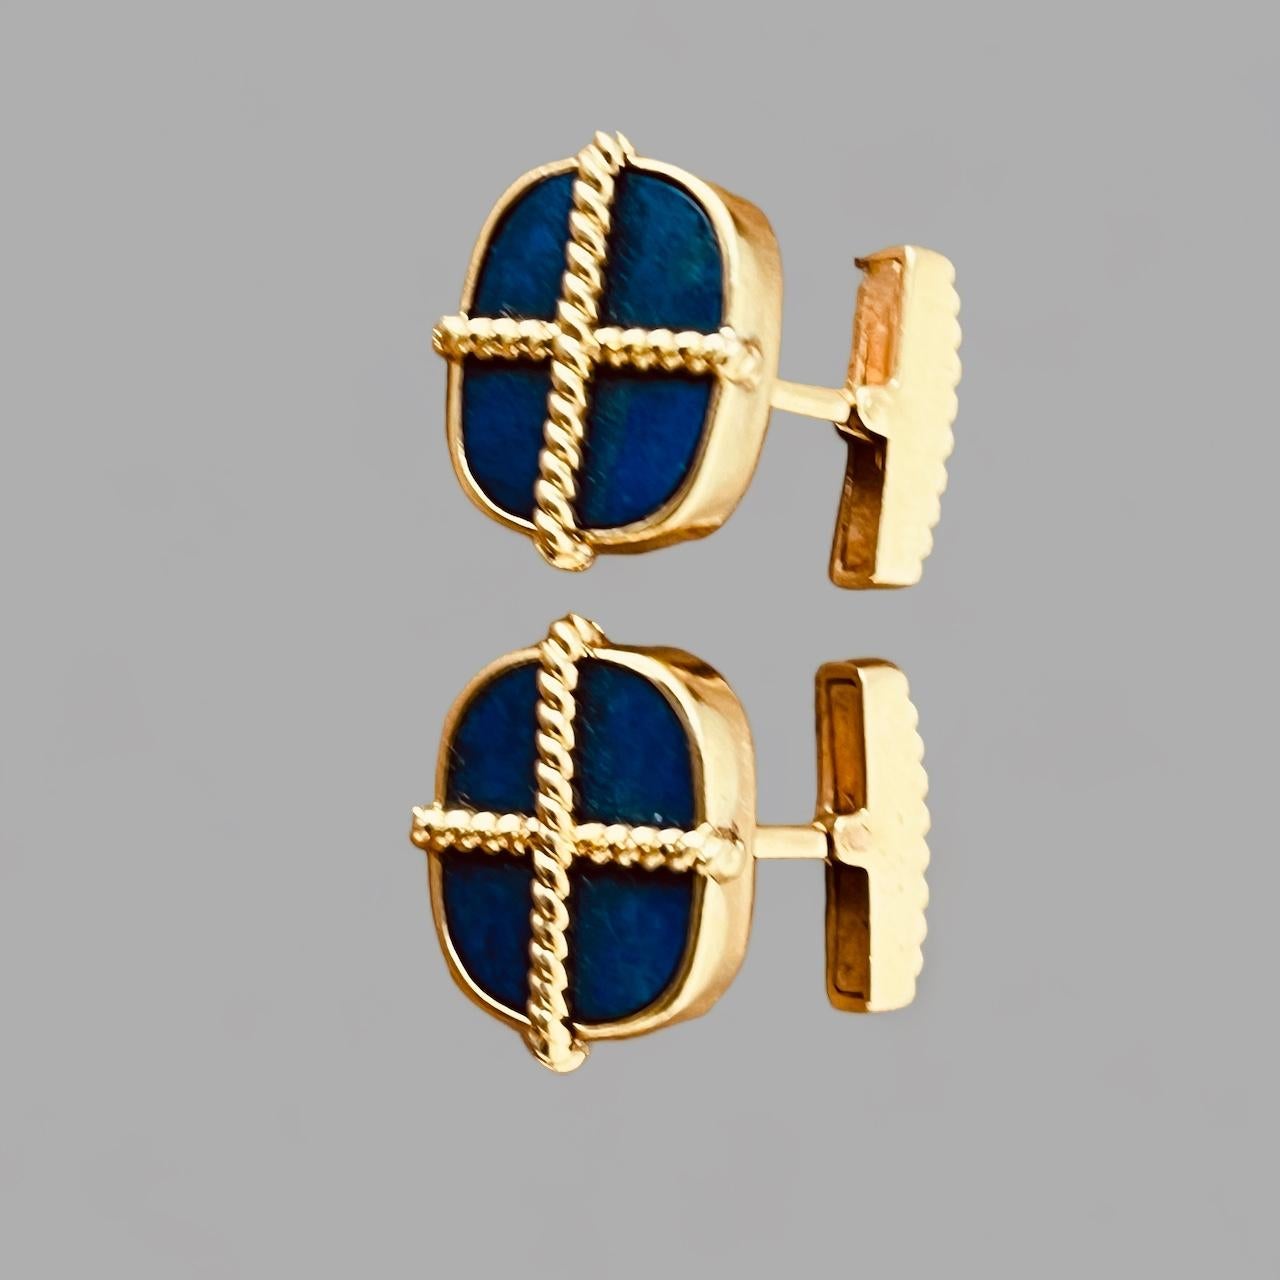 A Pair of 18ct Yellow Gold and Lapis Lazuli Cufflinks. Circa 1970's. For Sale 11